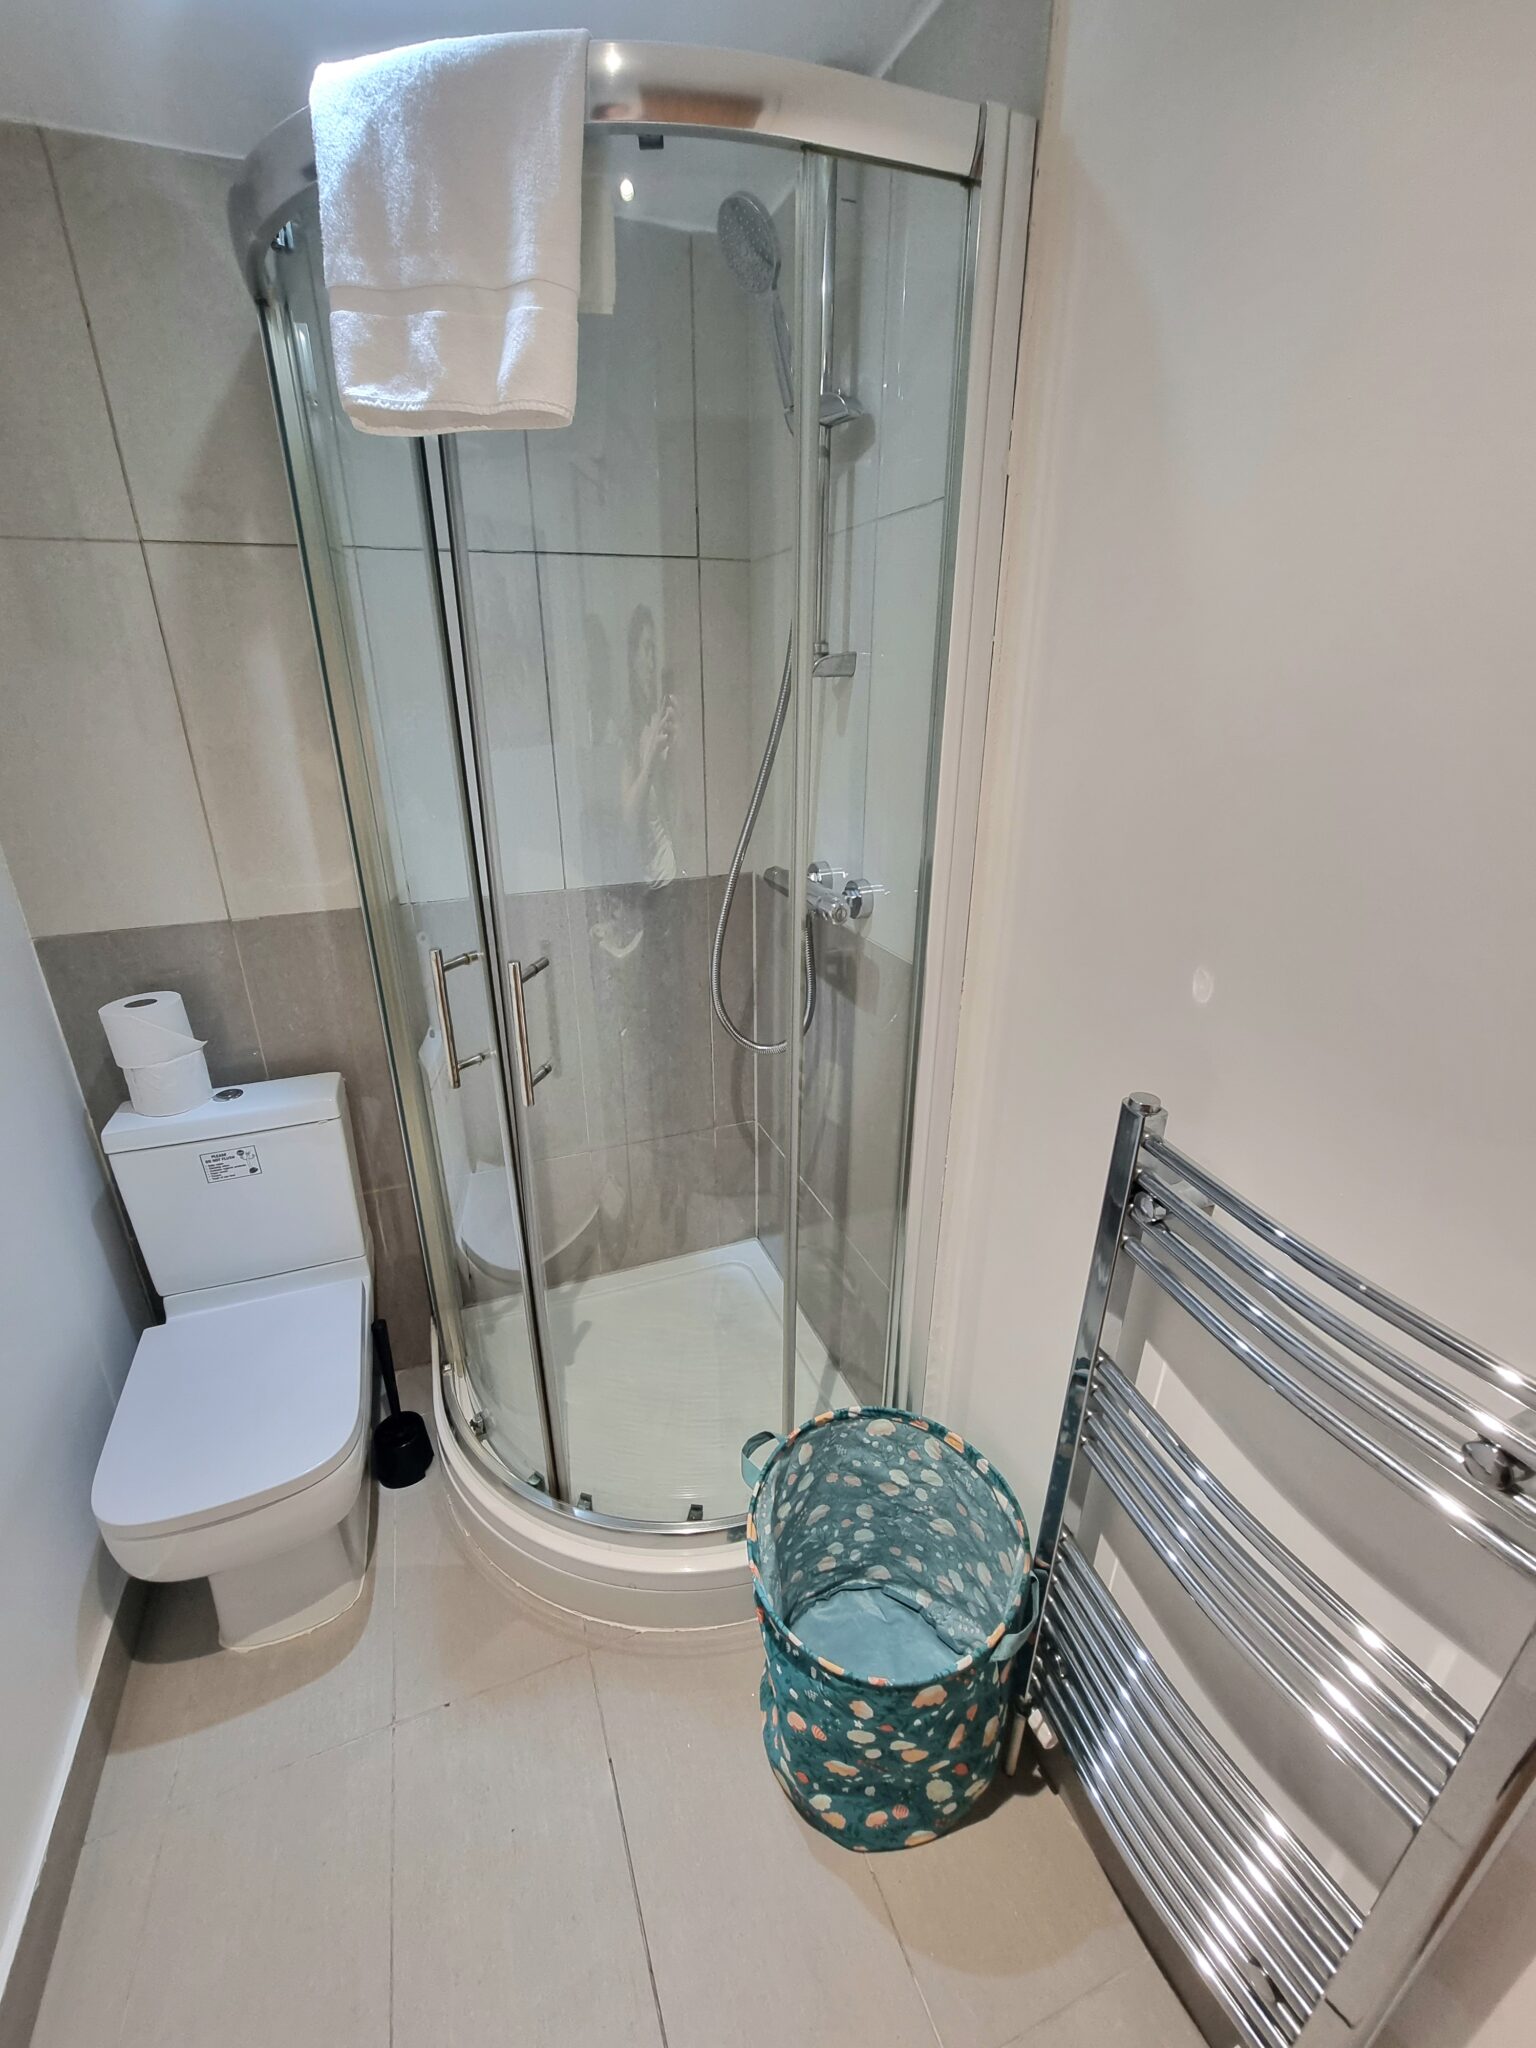 The-Best-Family-Accommodation-London-with-Parking,-private-Garden,-Wifi,-and-Smart-TY-for-Netflix.-This-4bed-3bath-Serviced-Apartment-in-Lewisham-is-only-8-min-to-London-Bridge,-and-15min-to-Charing-Cross-and-The-West-End